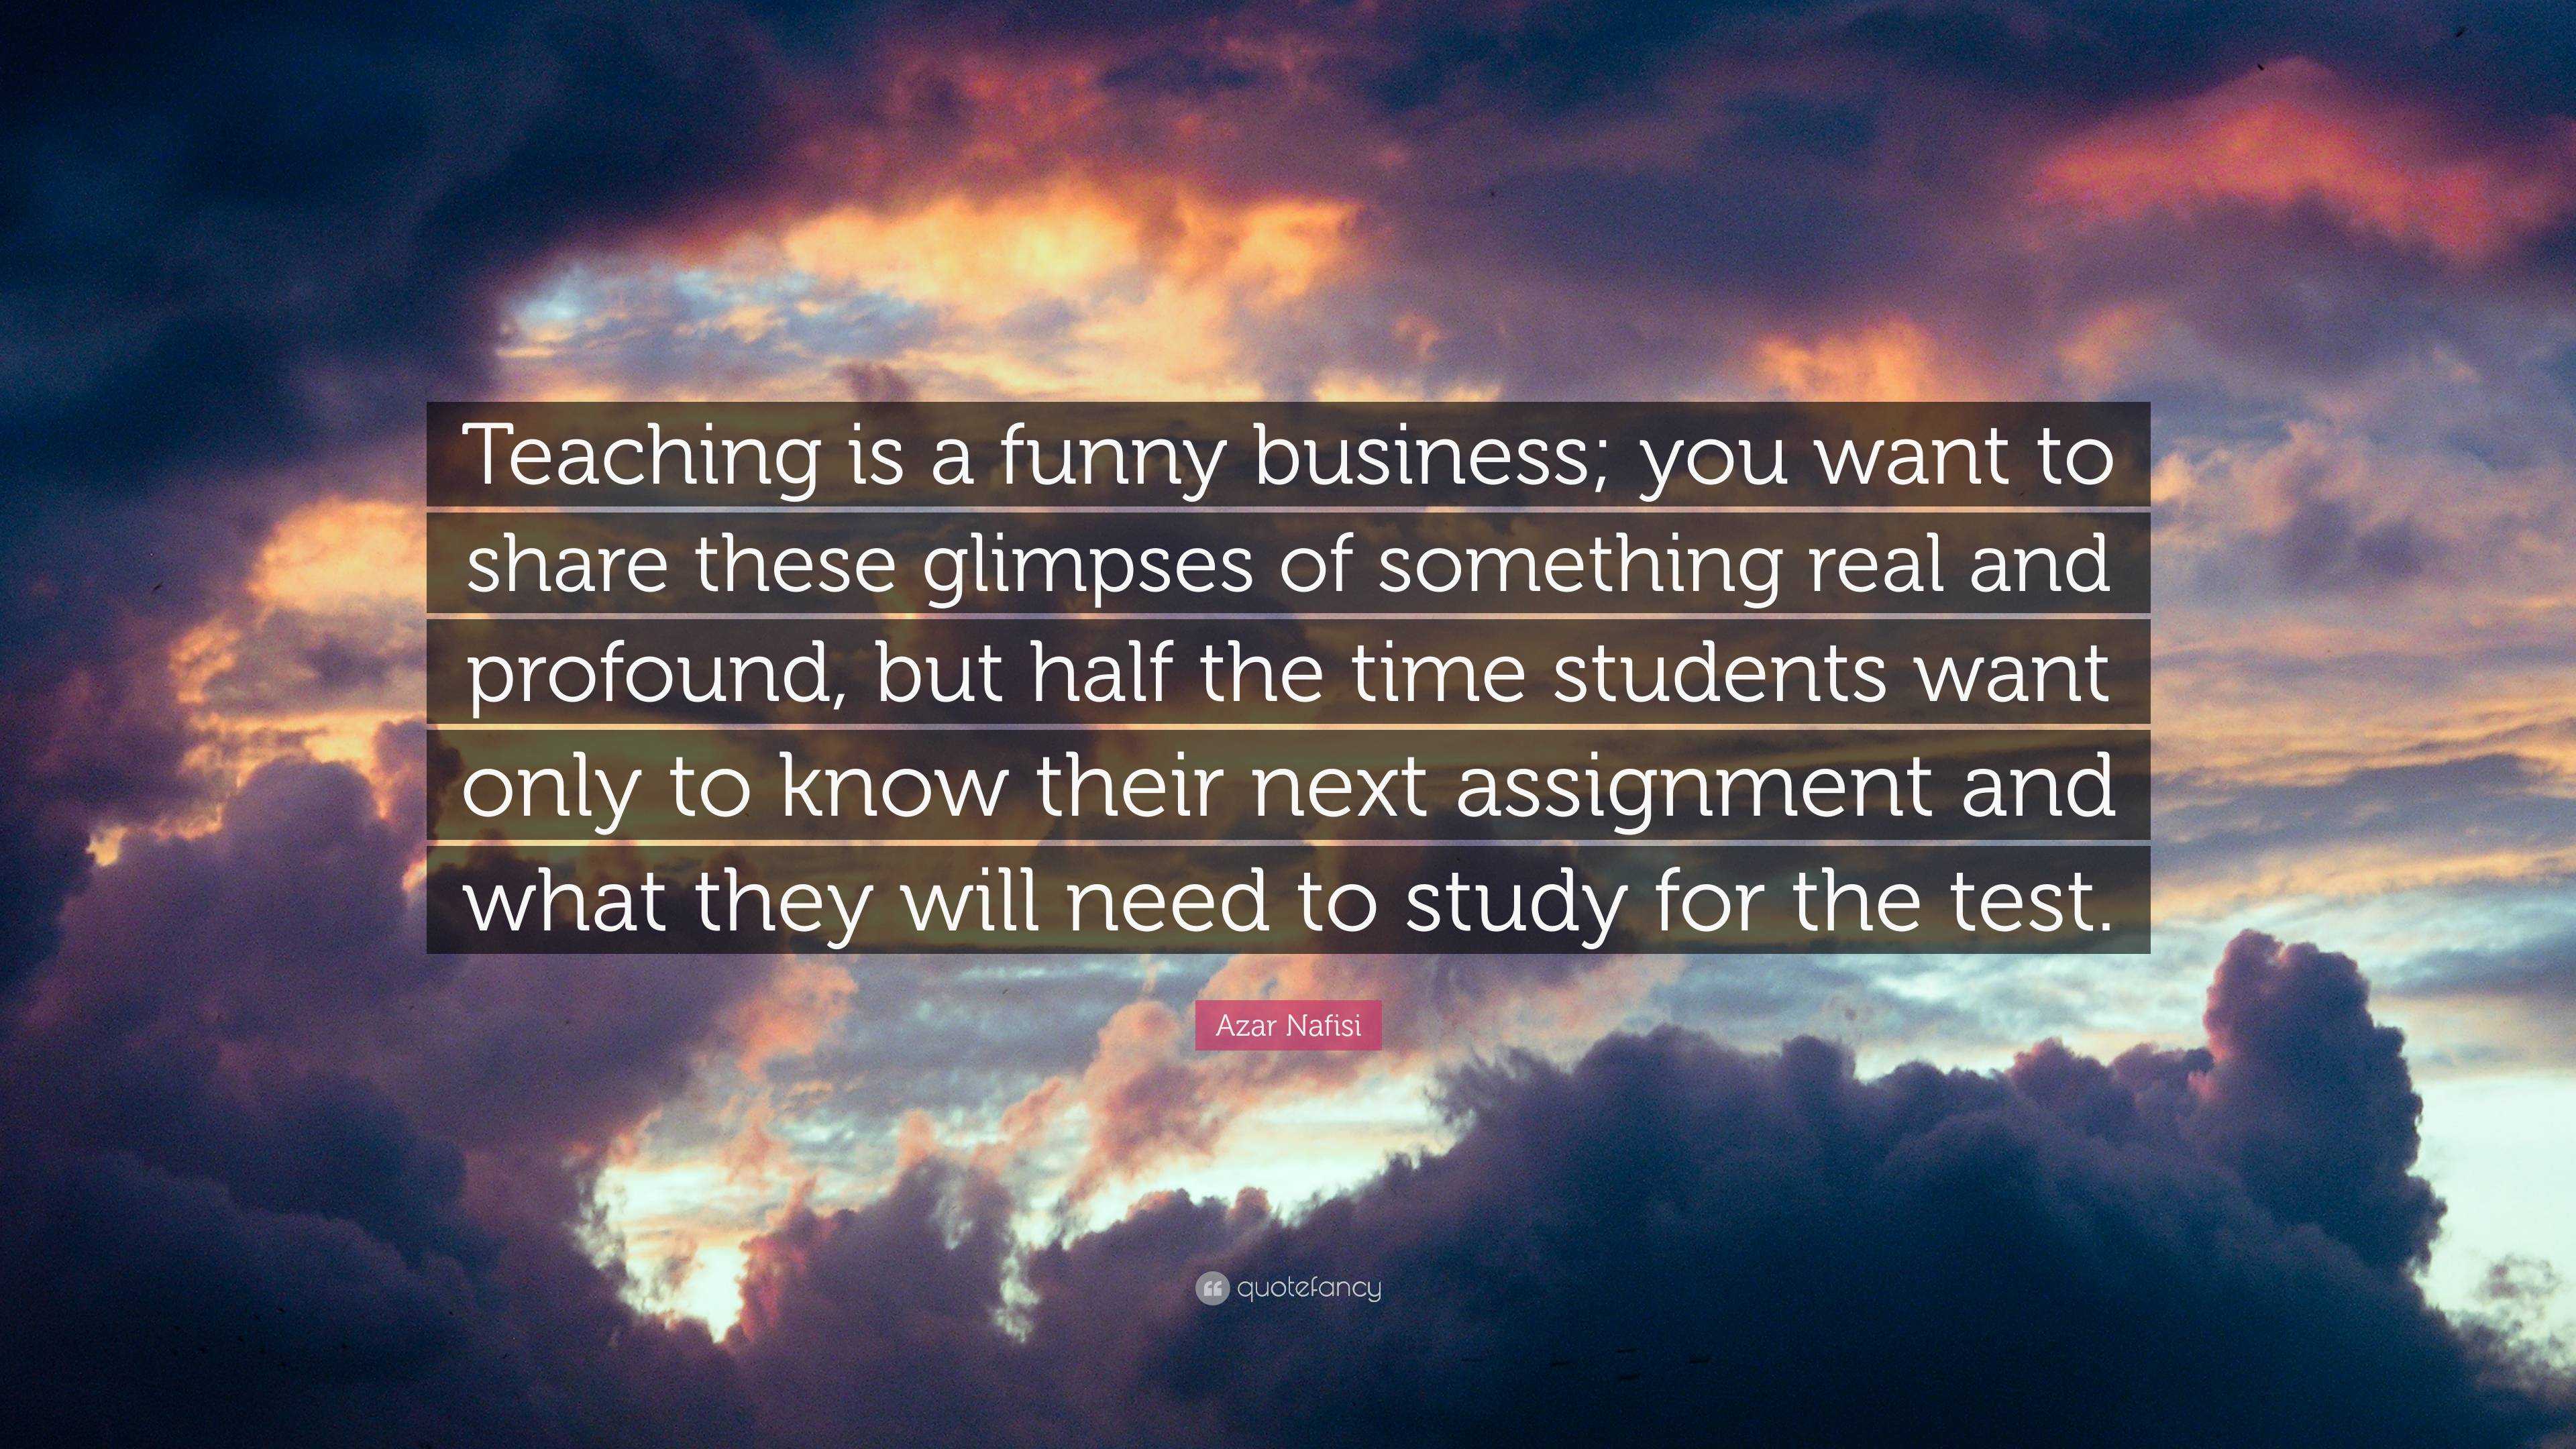 Azar Nafisi Quote: “Teaching is a funny business; you want to share these  glimpses of something real and profound, but half the time student...”